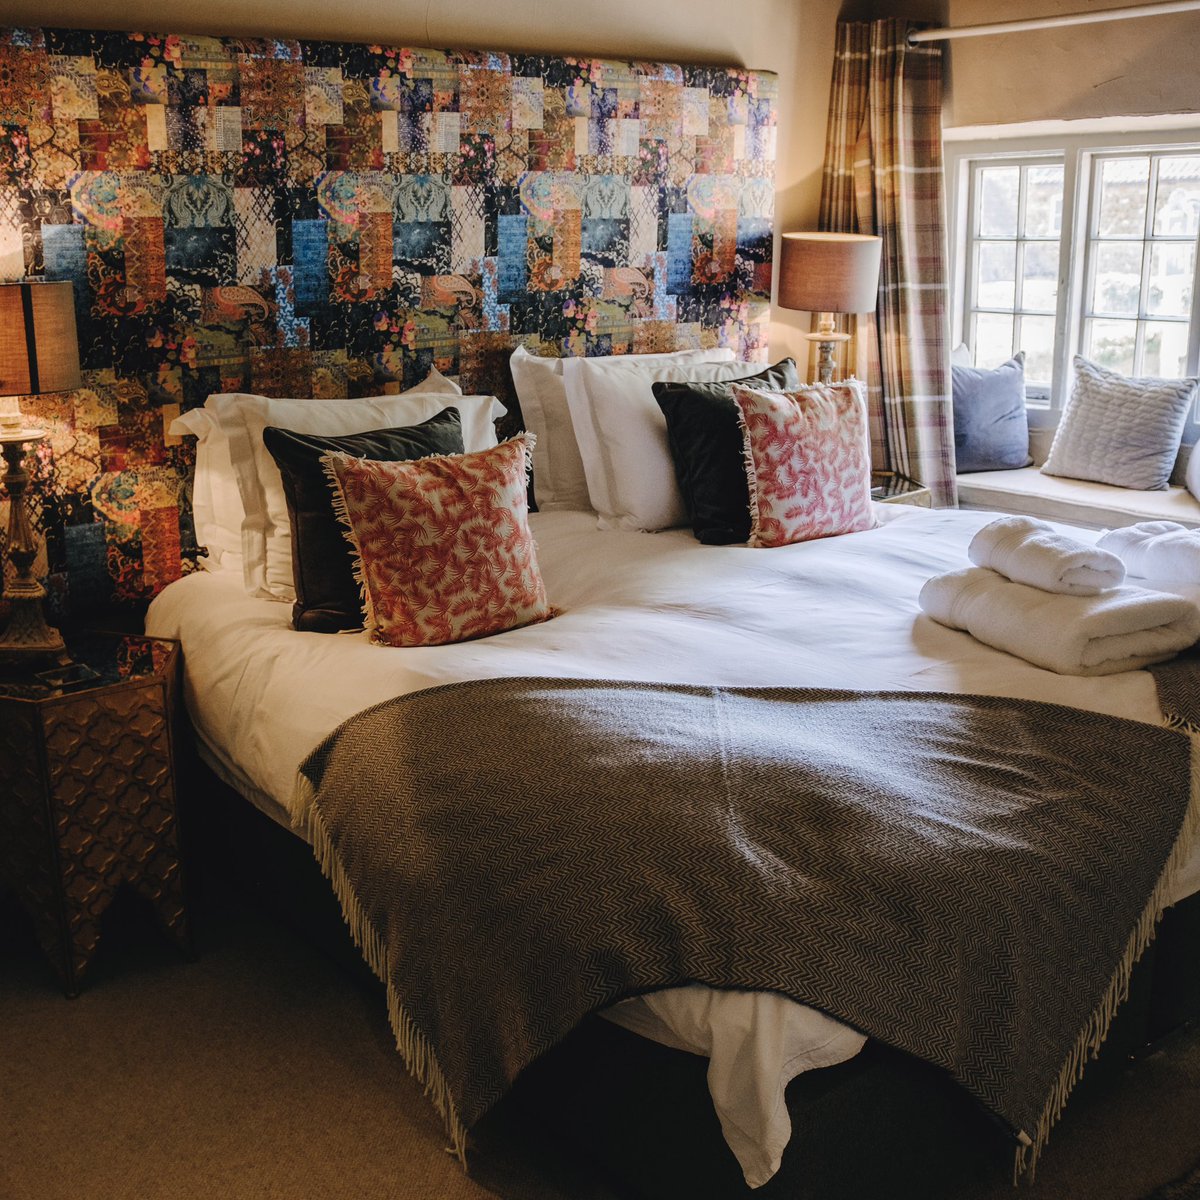 A sumptuous place to reside after your culinary adventure.

Relax and unwind in one of our 13 characterful rooms and cottages.

Visit our website to take a closer look at our accommodation options. 

#restaurantwithrooms #foodietrip